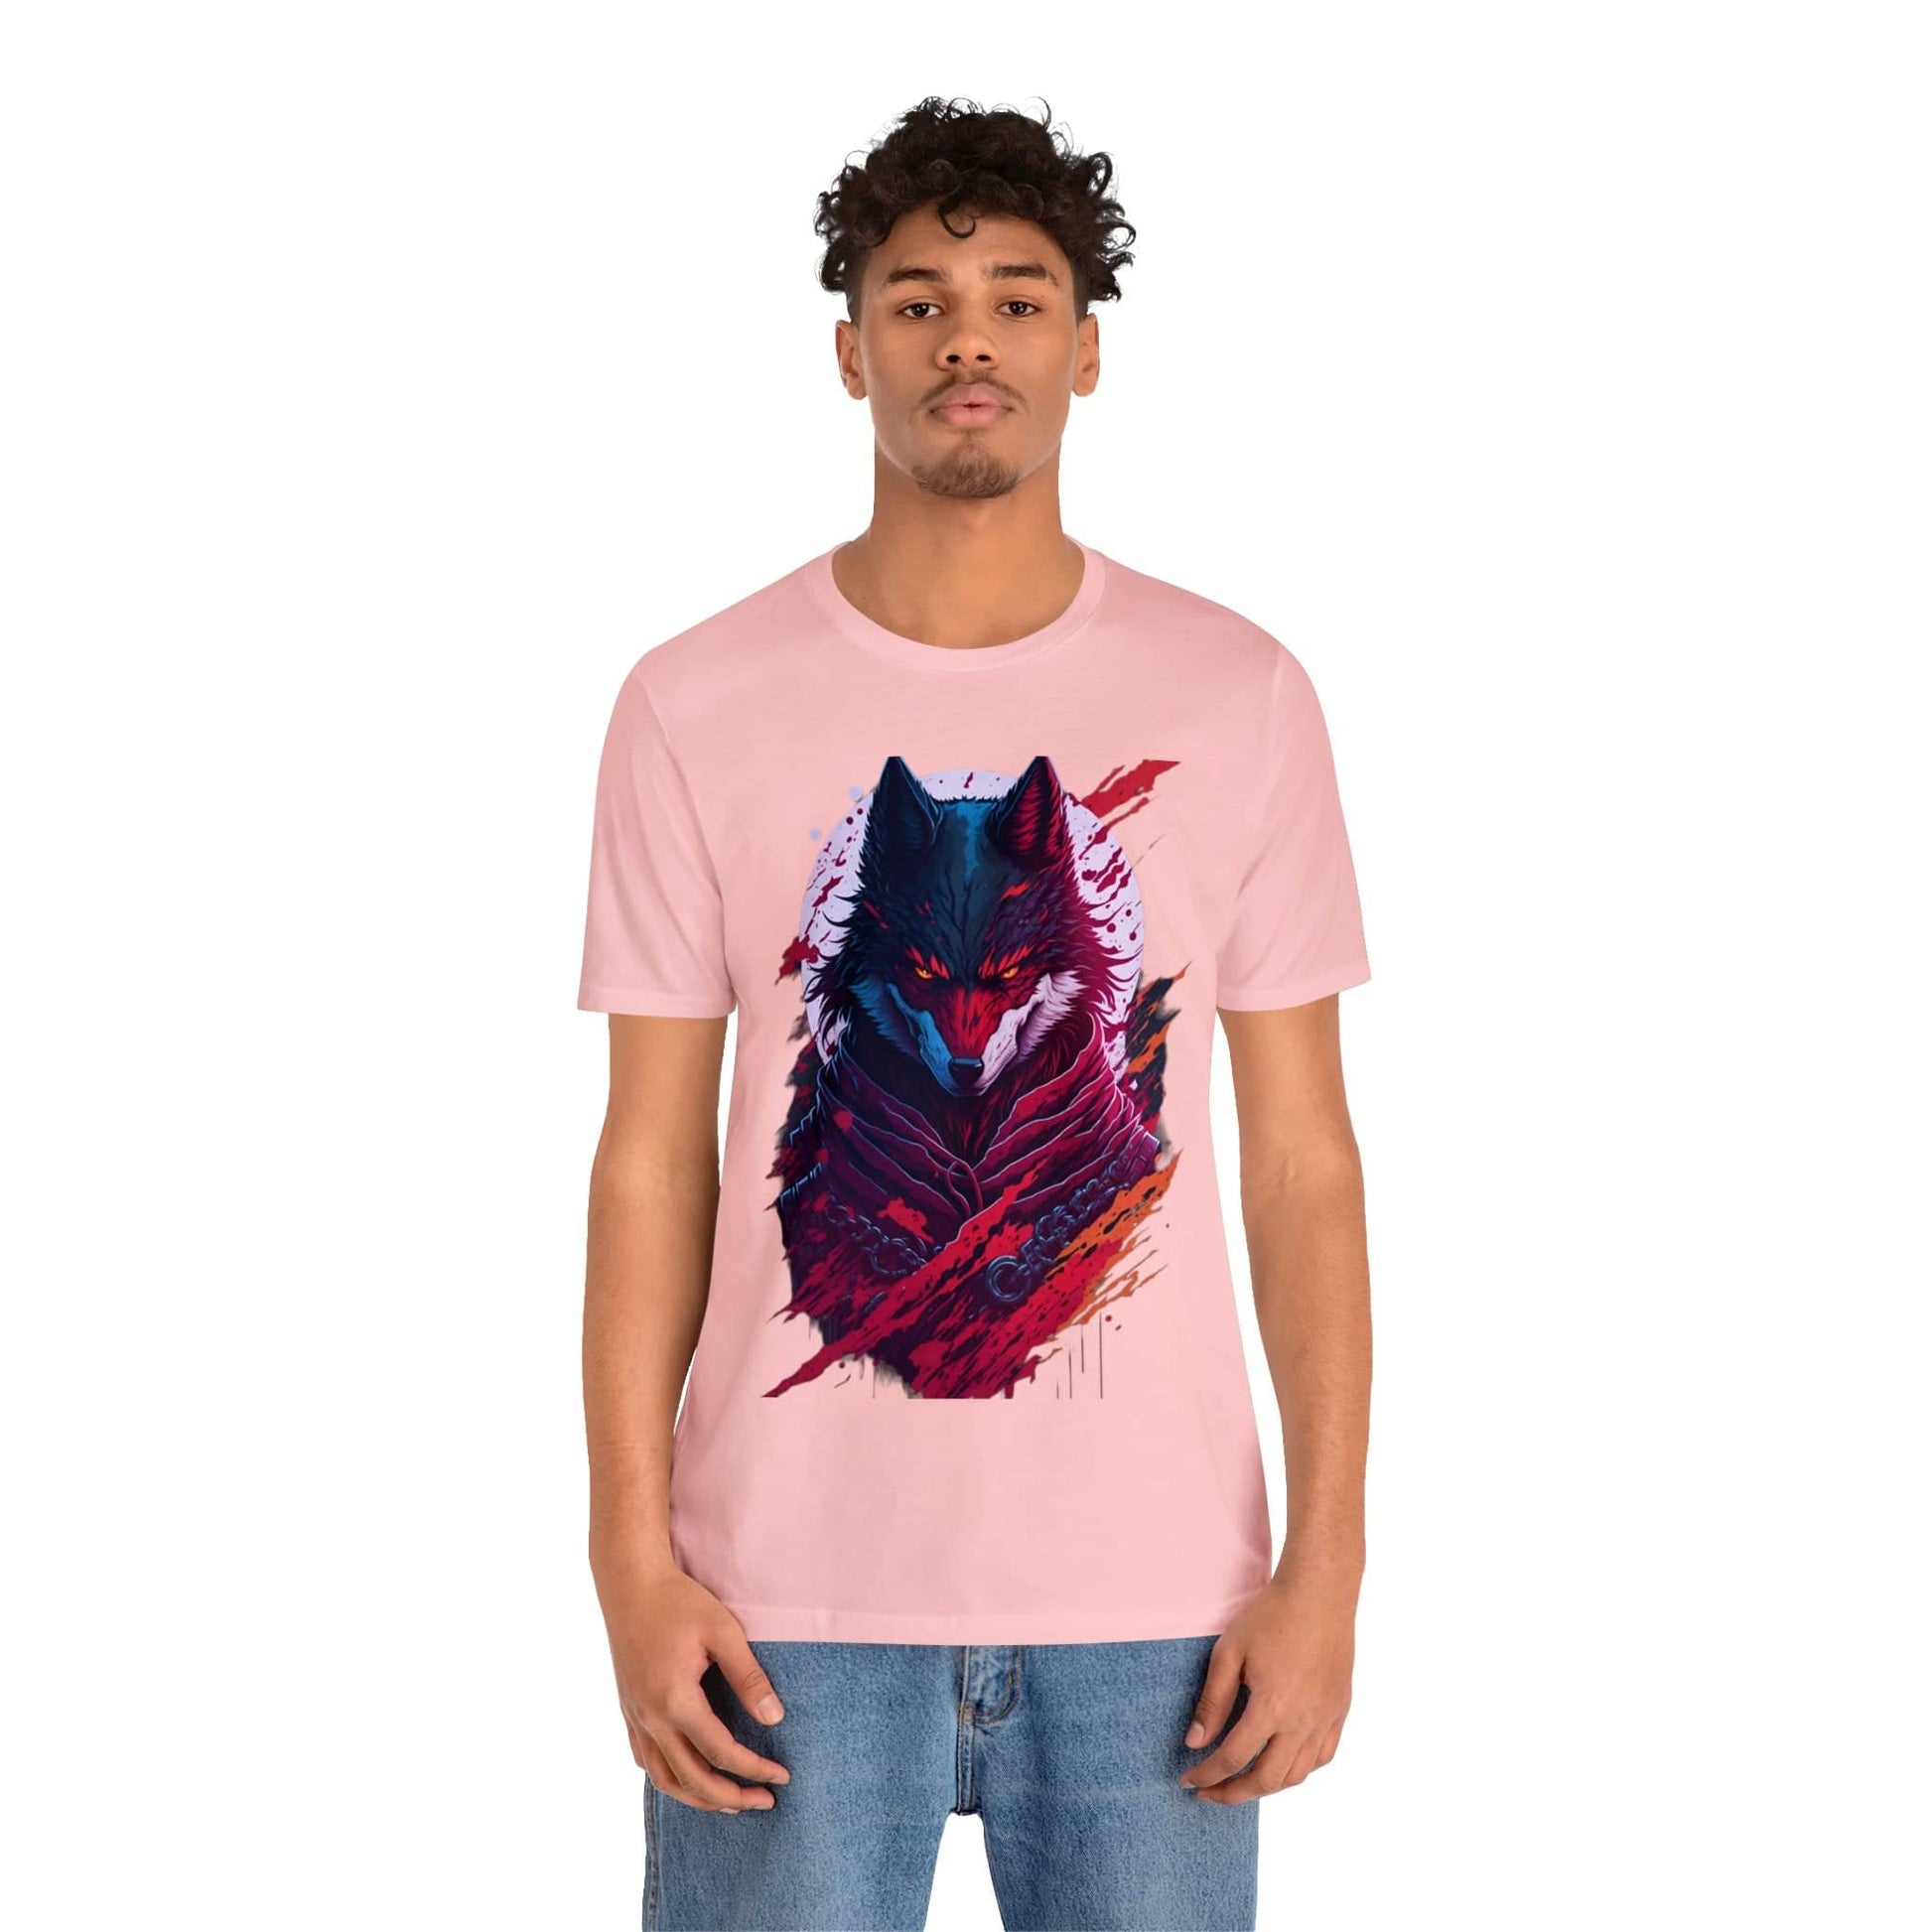 "Alex Hart: Unique T-Shirt Designs, American Design, Express Style Boldly, Fashion Trends, Personal Style, Exclusive Offers" T-Shirt Bigger Than Life Pink S 